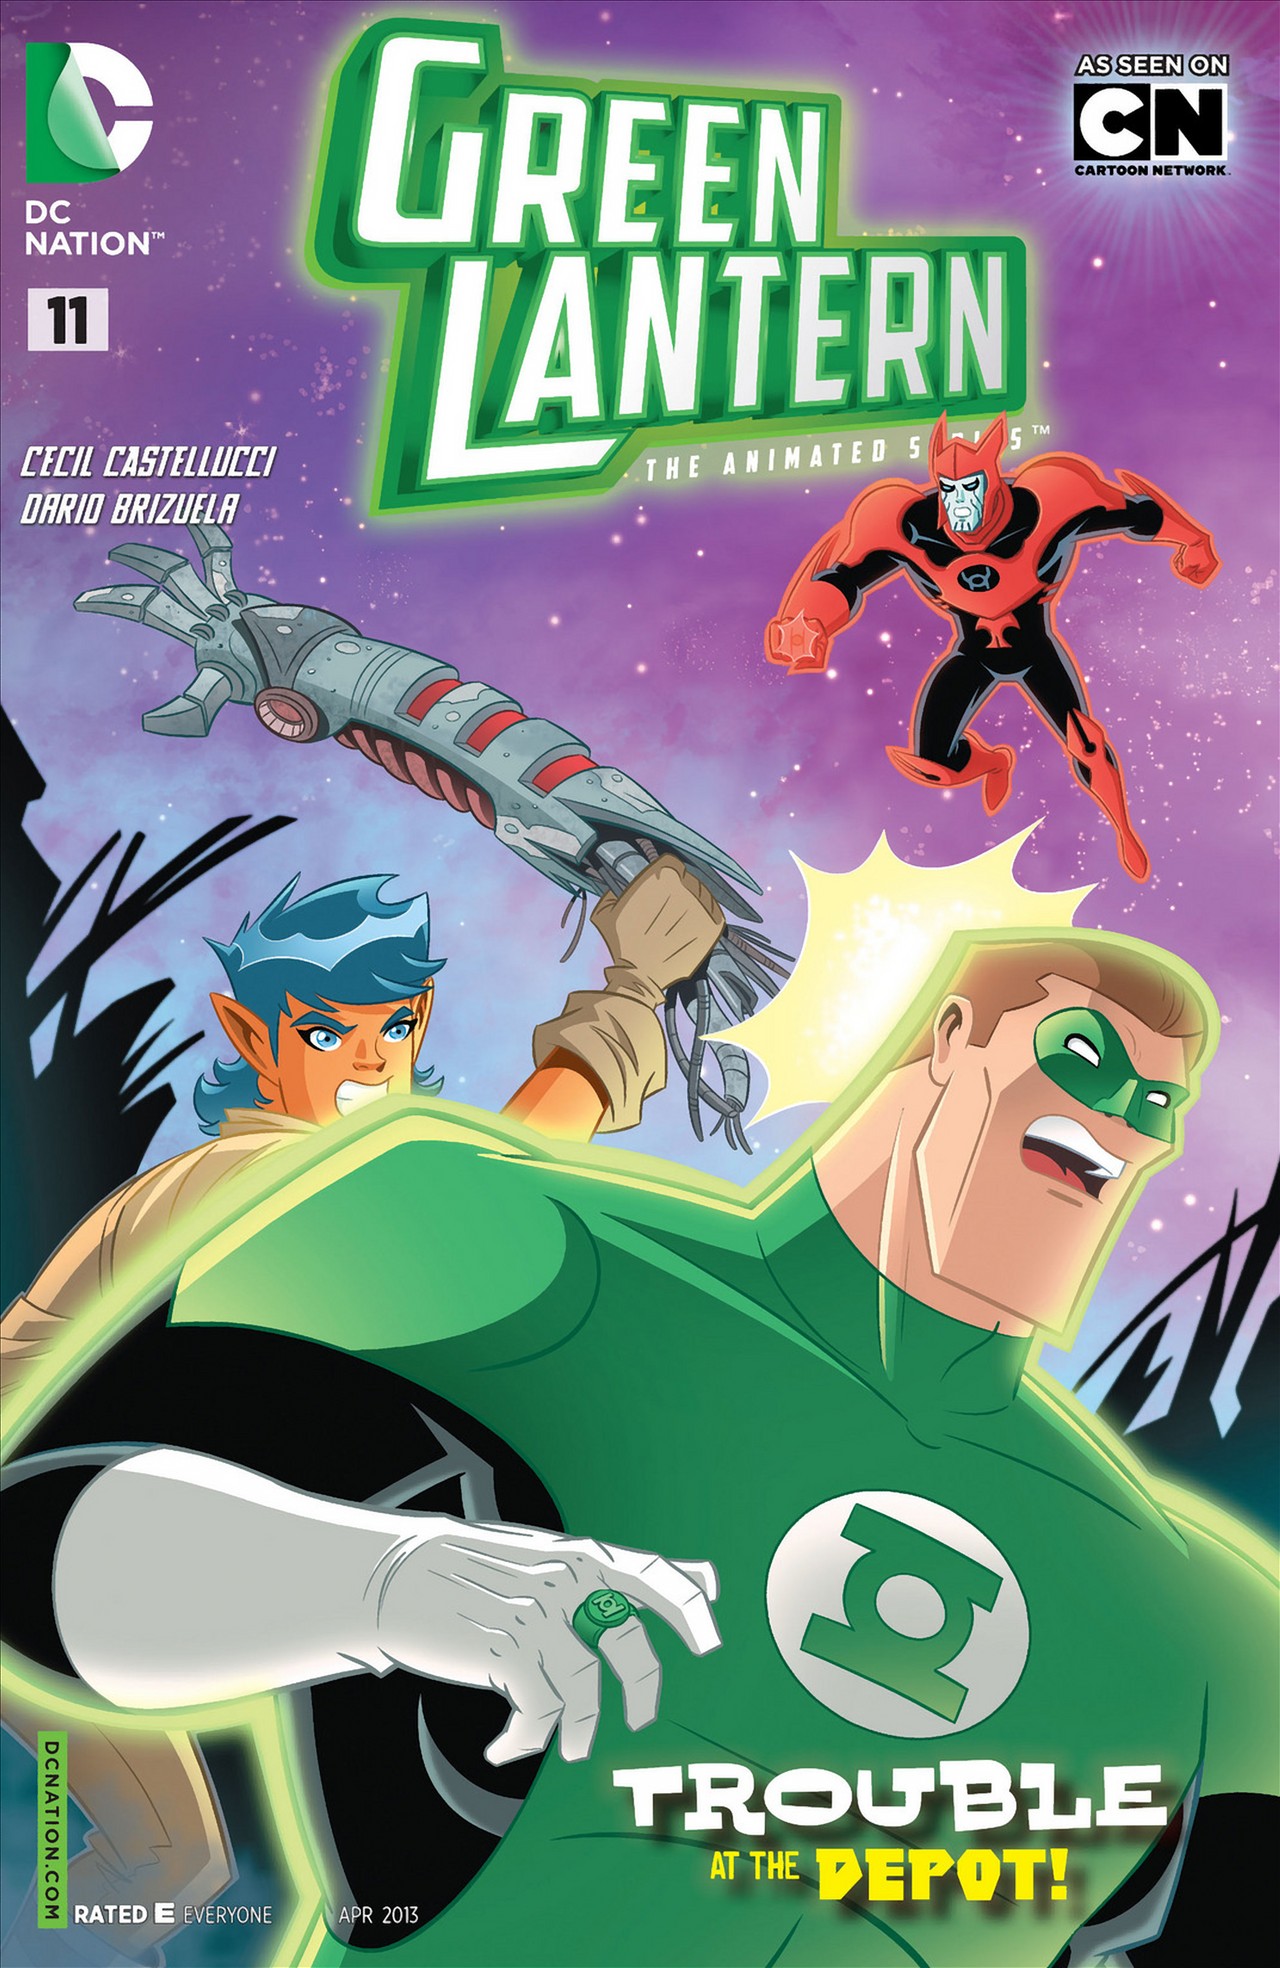 Green Lantern The Animated Series Issue 11 | Read Green Lantern The  Animated Series Issue 11 comic online in high quality. Read Full Comic  online for free - Read comics online in